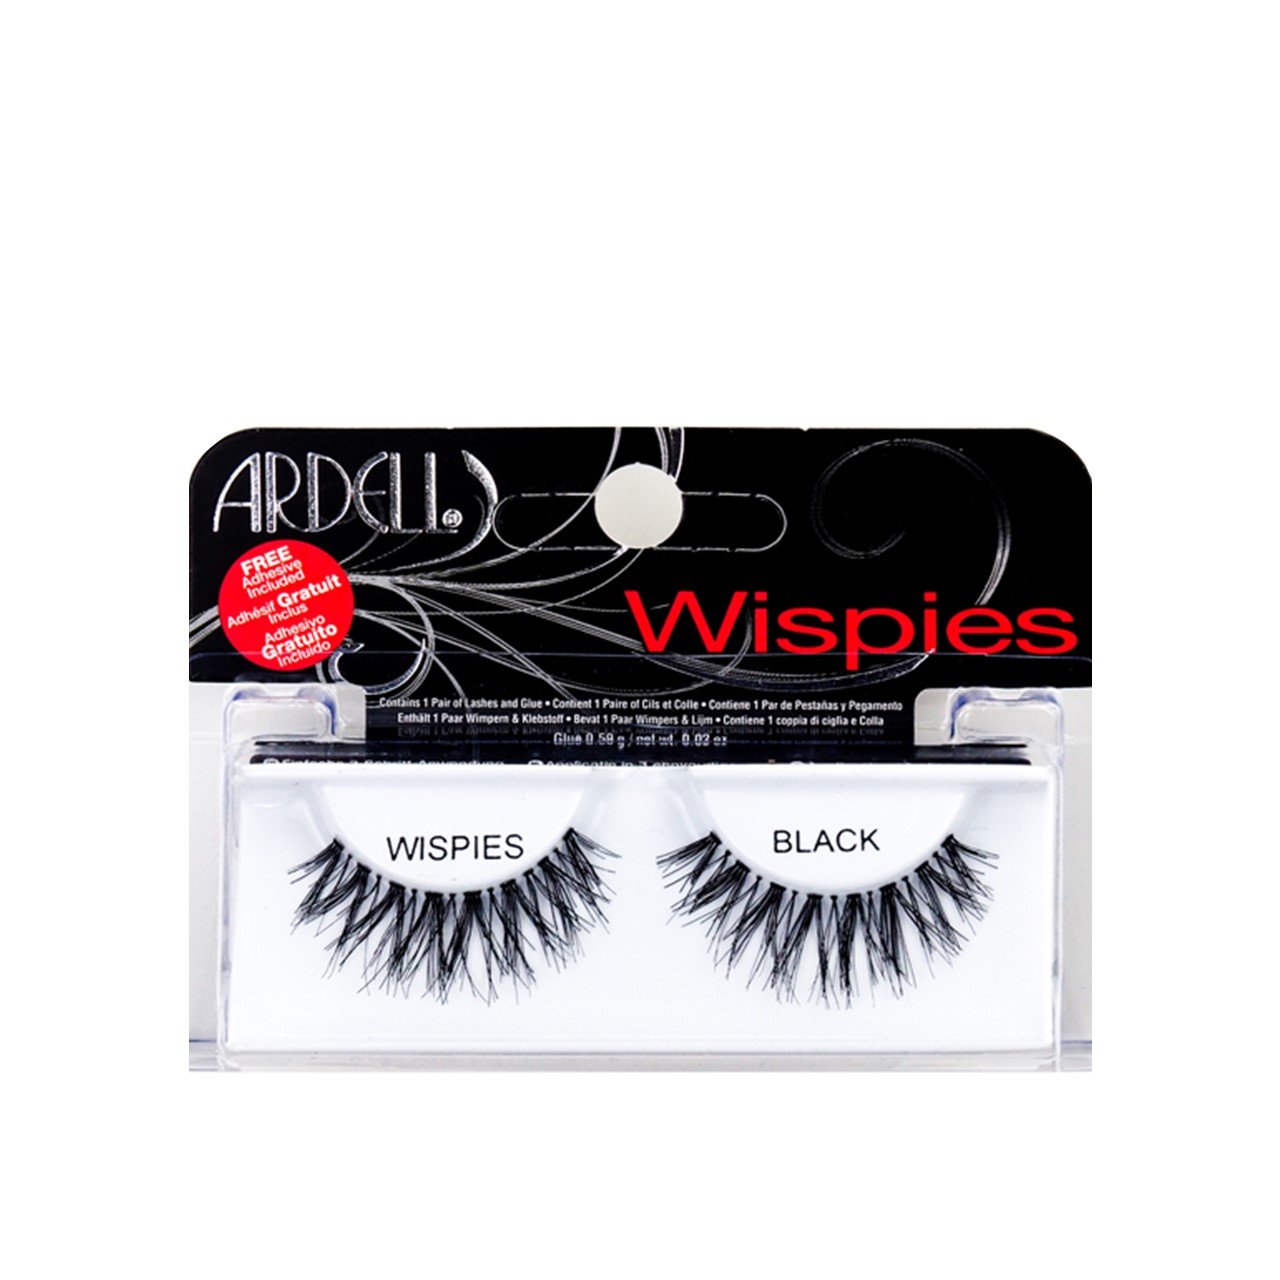 Ardell Wispies Lashes Black x1 Pair